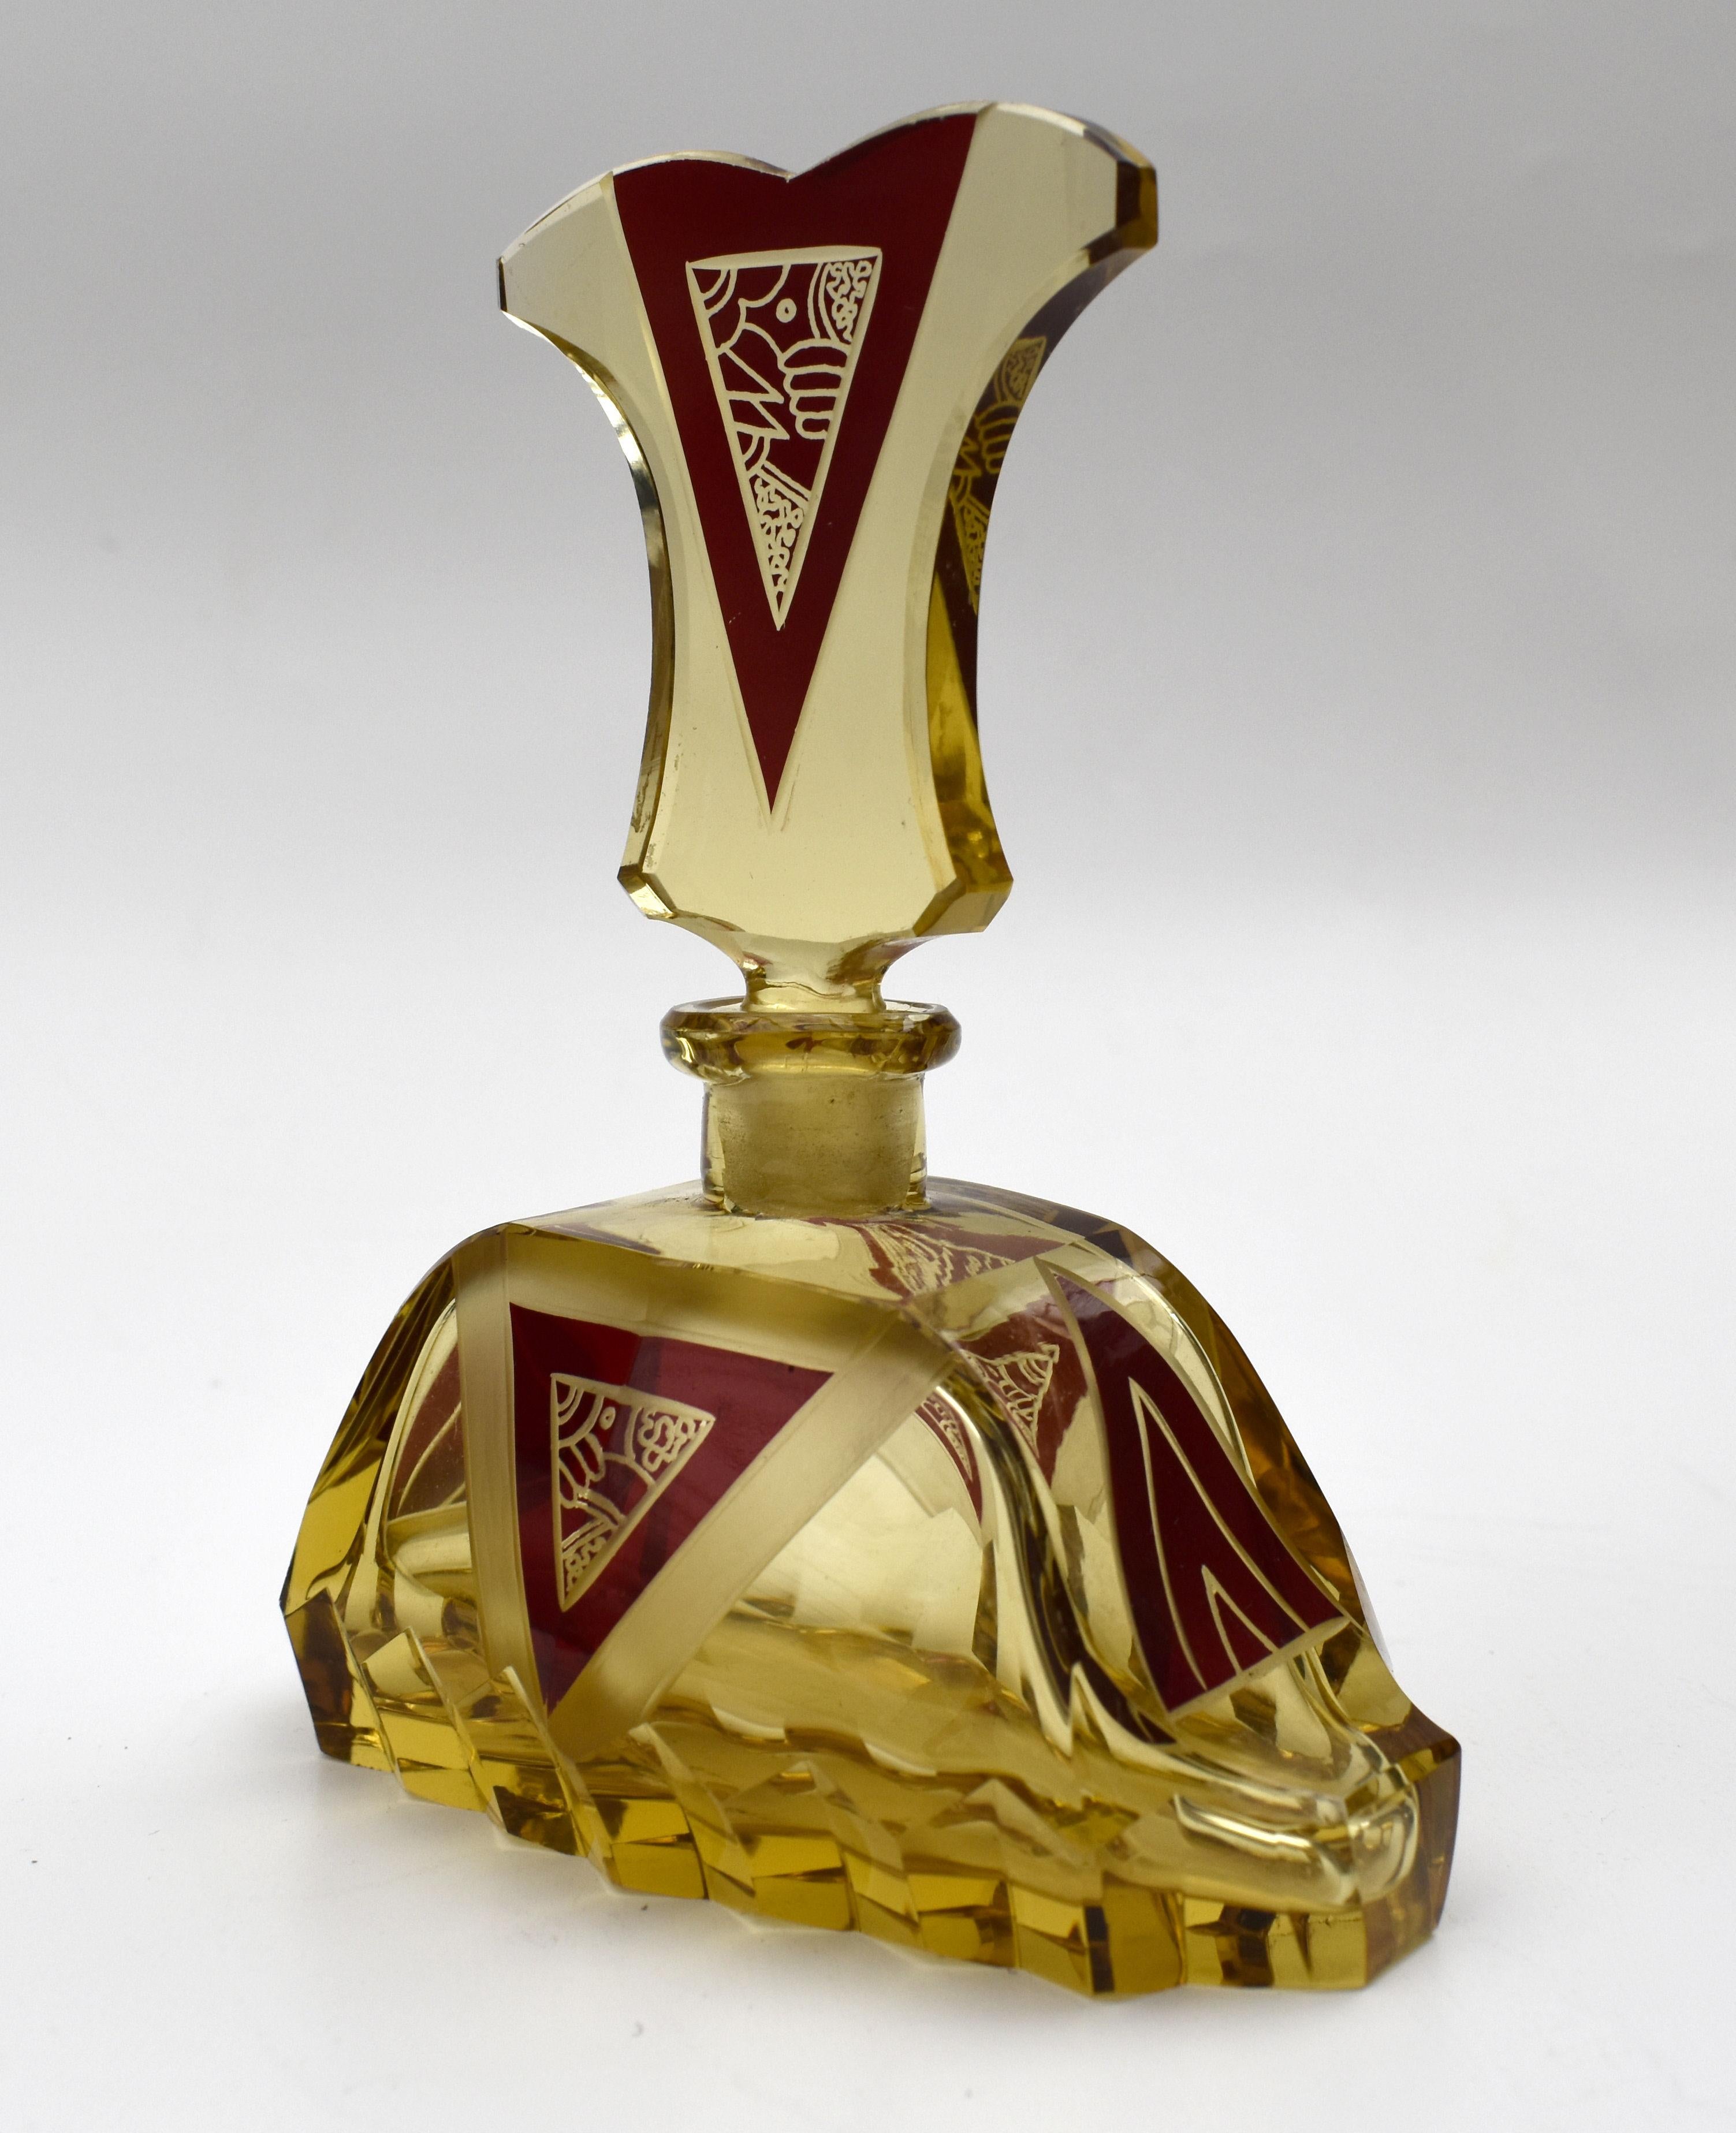 A truly beautiful Art Deco amber glass scent bottle with a very attractive and iconic shape and patterning with geometric dark red enamel decoration to both the body of the bottle and stopper. Manufactured in Czech republic in the 1930s this